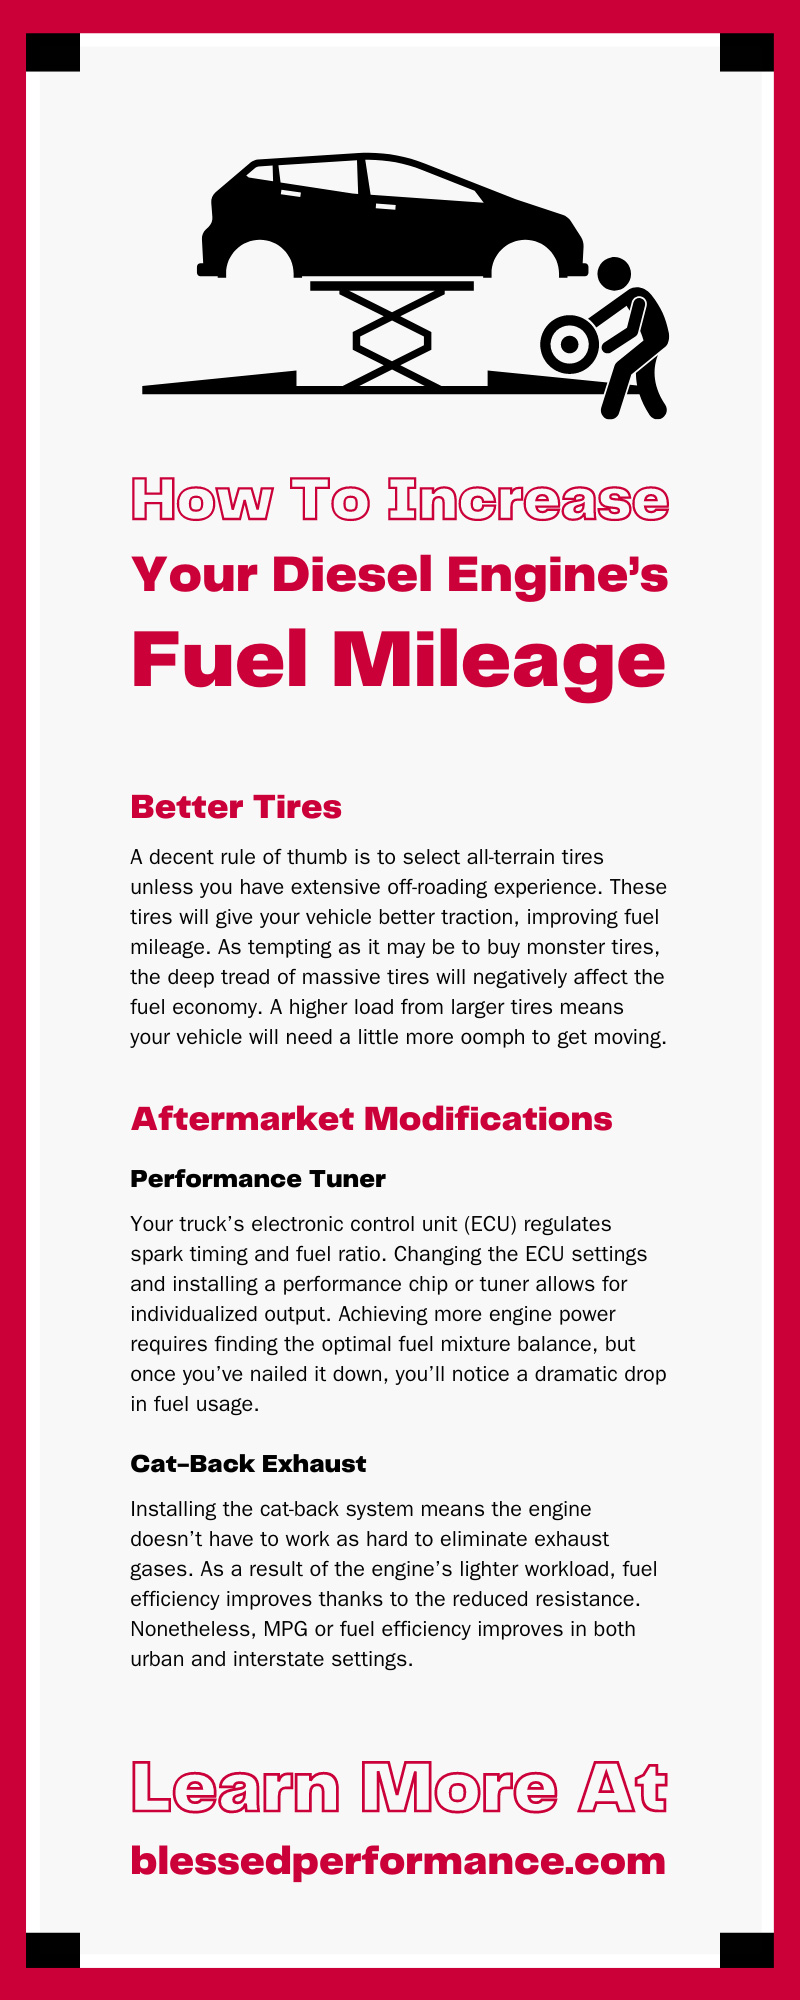 How To Increase Your Diesel Engine’s Fuel Mileage